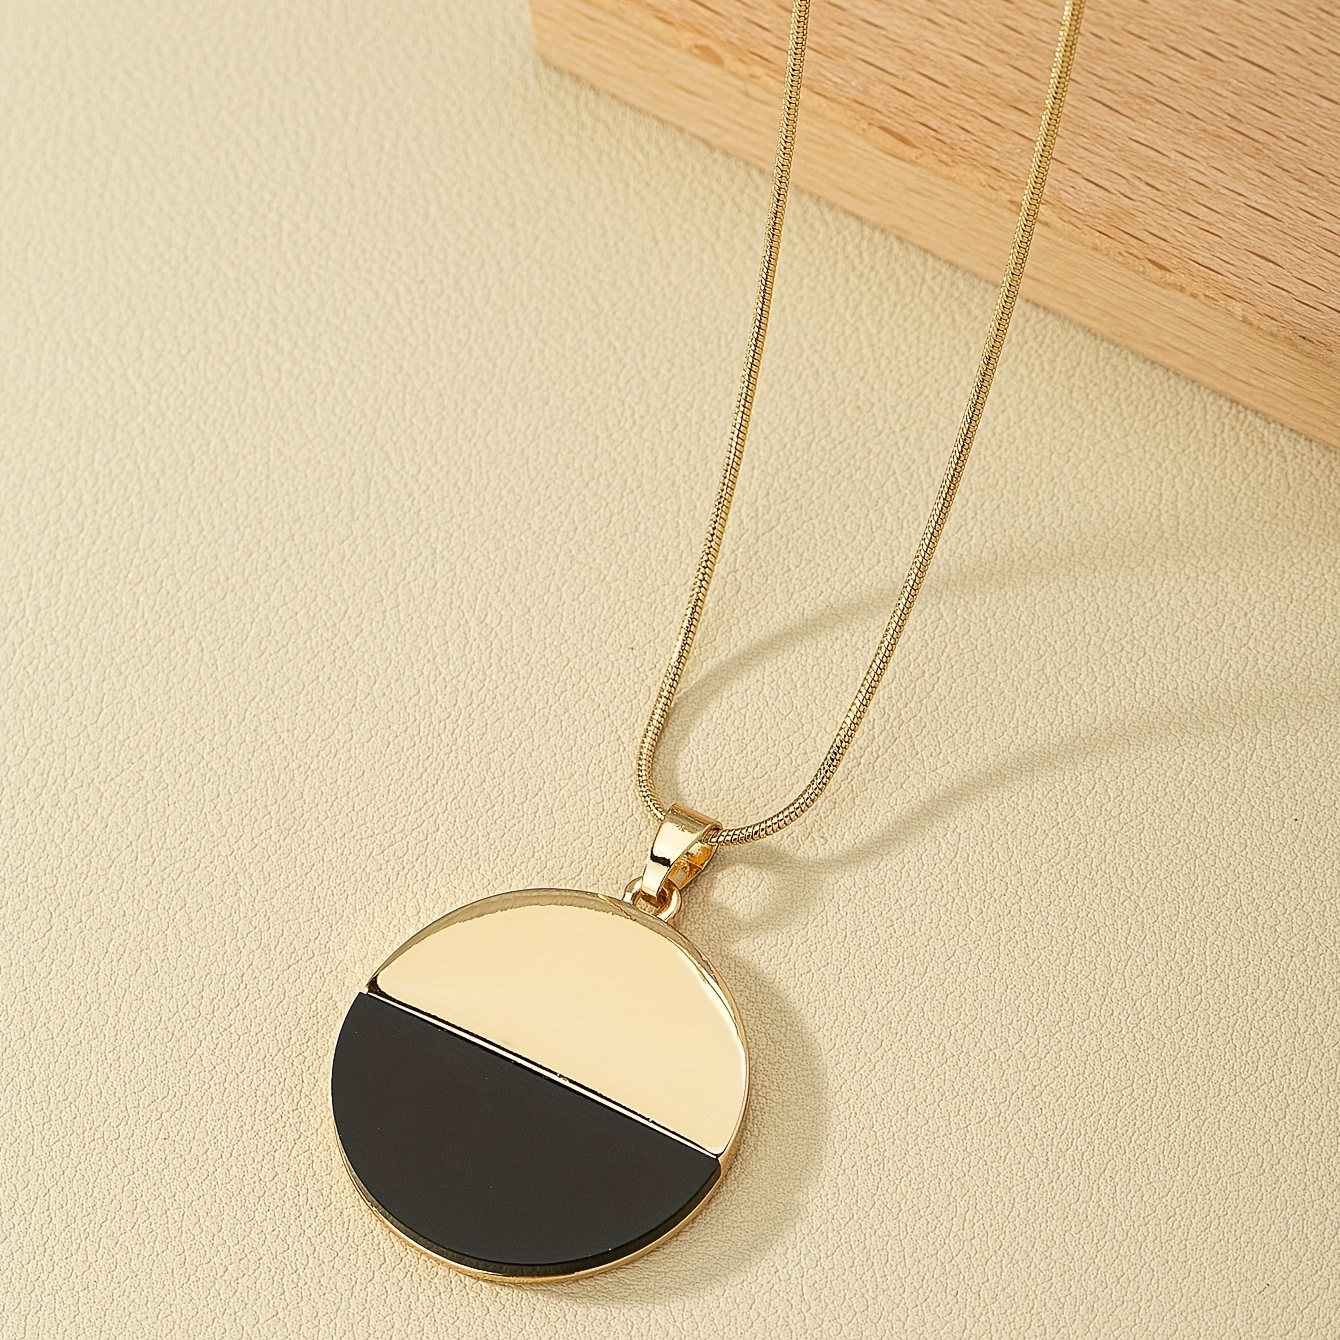 

14k Plated Round Black & Pendant Long Necklace